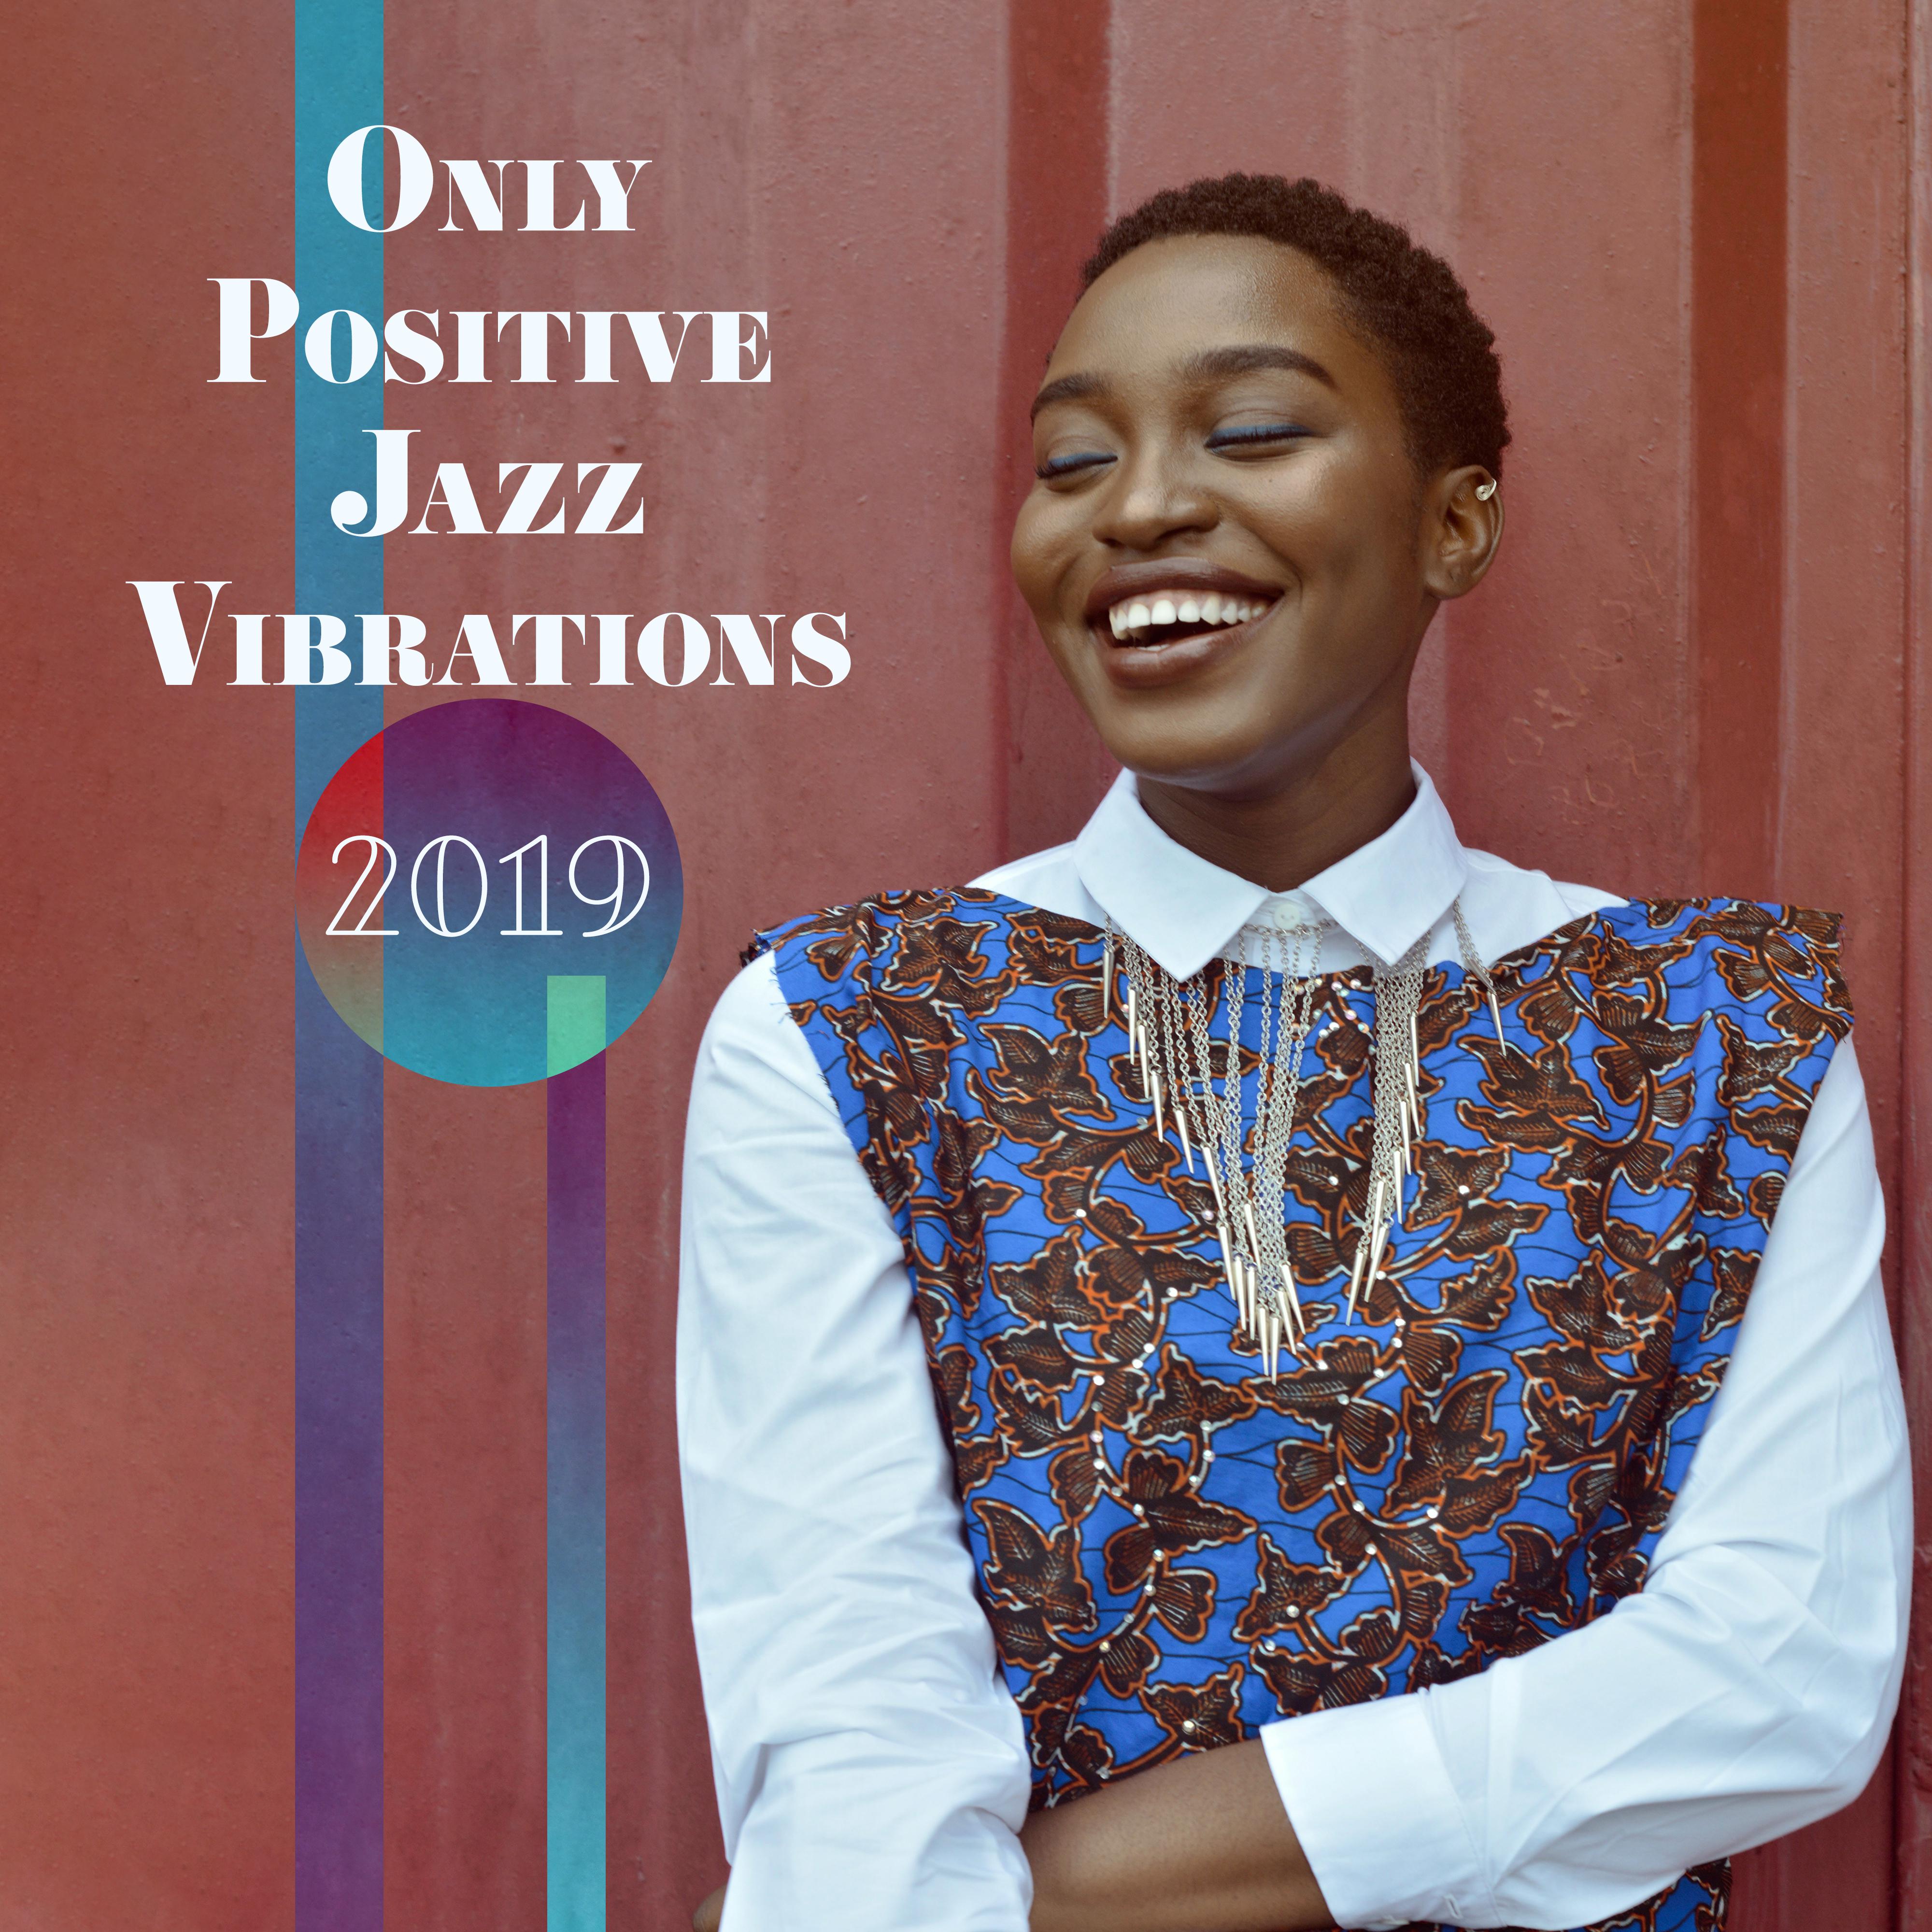 Only Positive Jazz Vibrations 2019  Compilation of Smooth Jazz Top Hits, Music Perfect for Background for a Date with Love or Meeting with Friends, Vintage Melodies